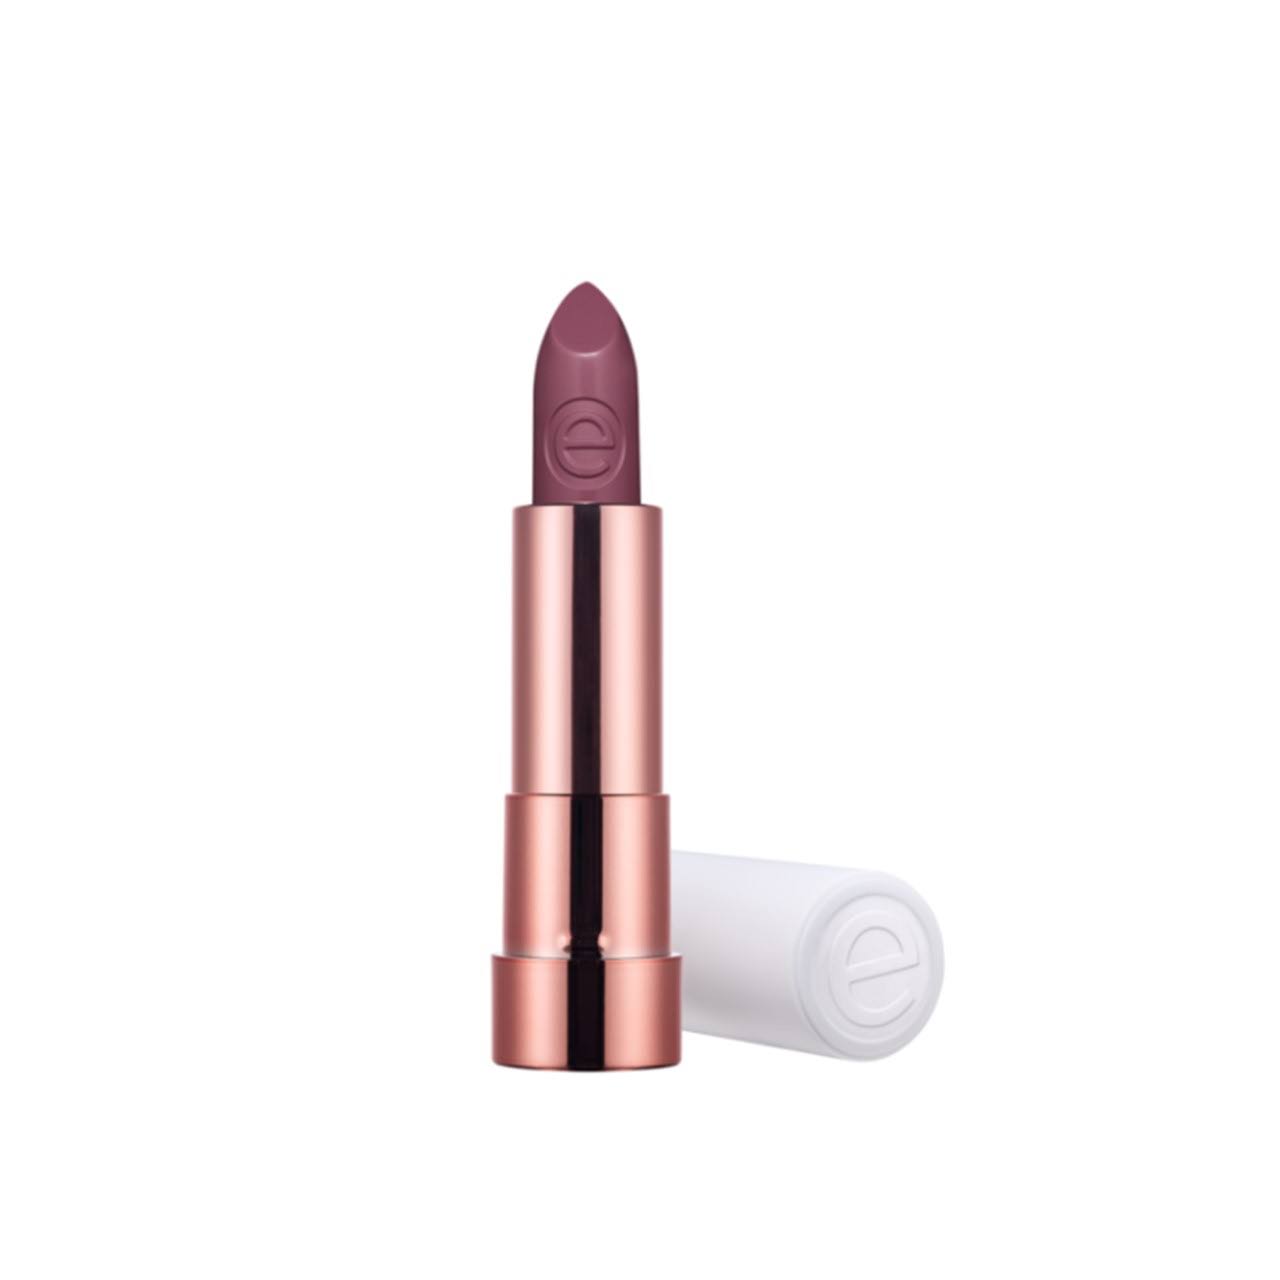 Essence This Is ME. Lipstick 26 Daring 3.5g